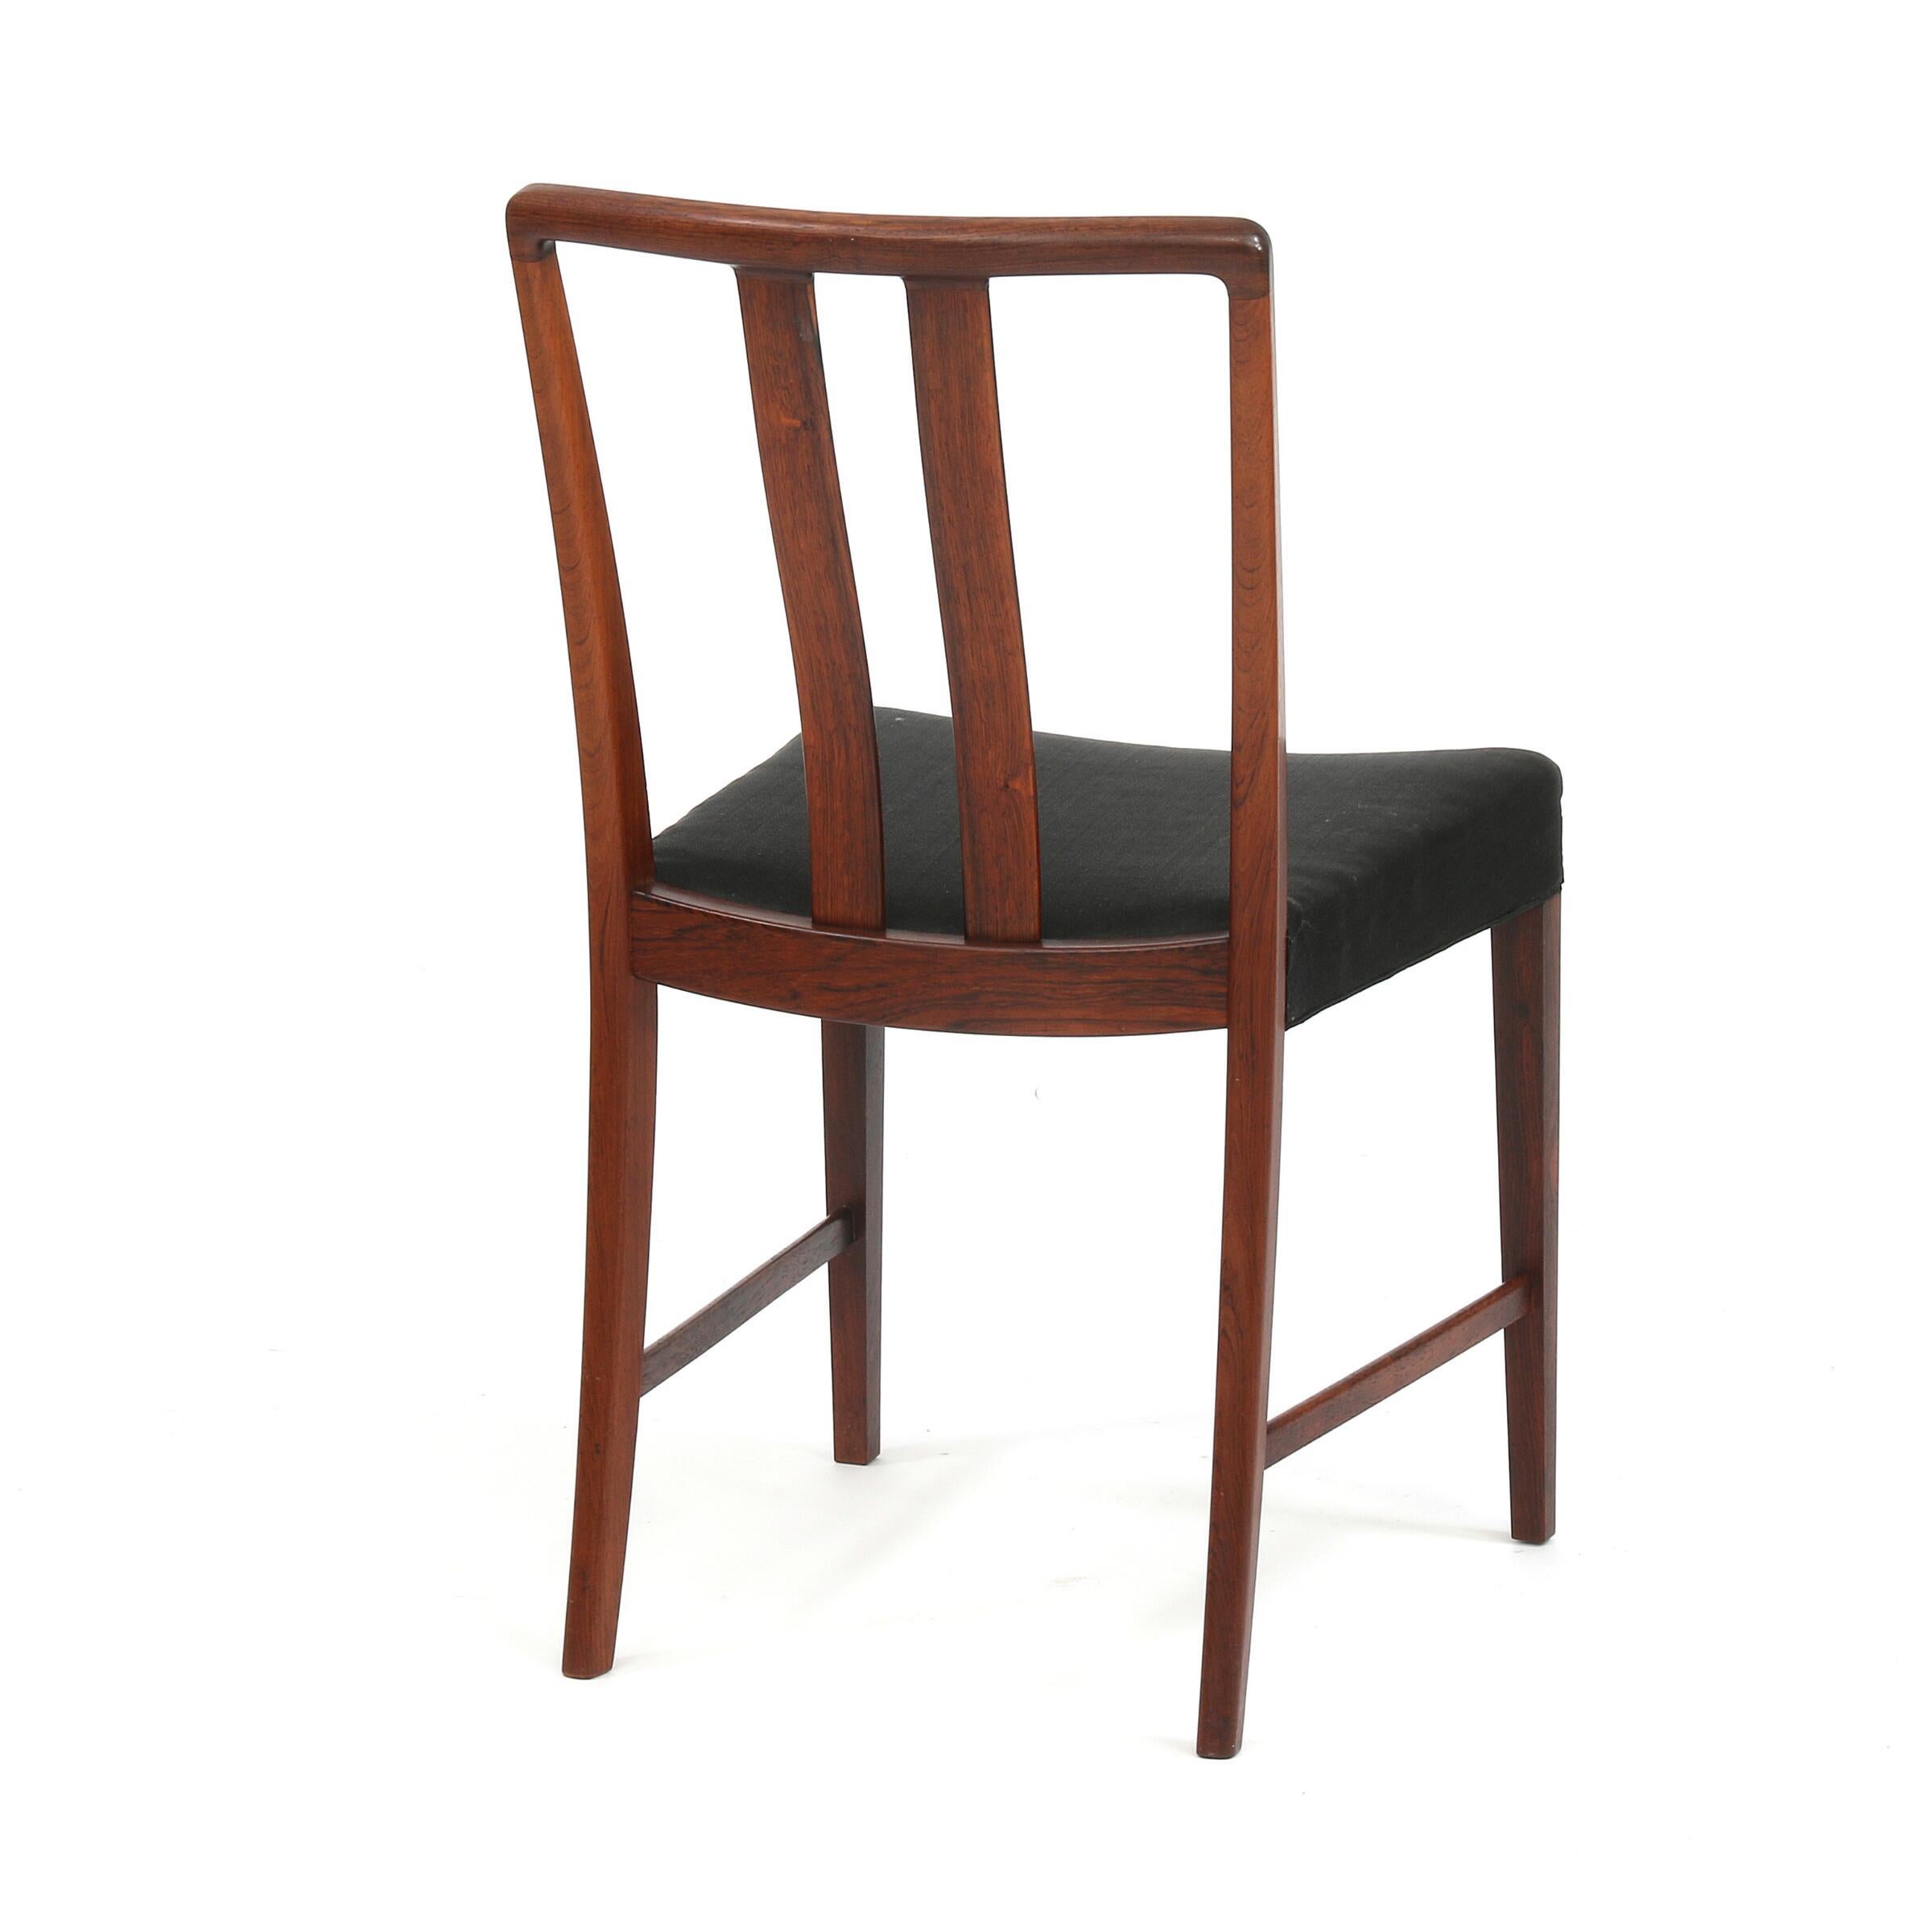 Peder Pedersen: Set of seven dining chairs of Brazilian rosewood. Seat upholstered with horse hair. Manufactured by Peder Pedersen. Probably desiogned by erik Kolling Andersen, given there close collboration. 

CITES certificate available for